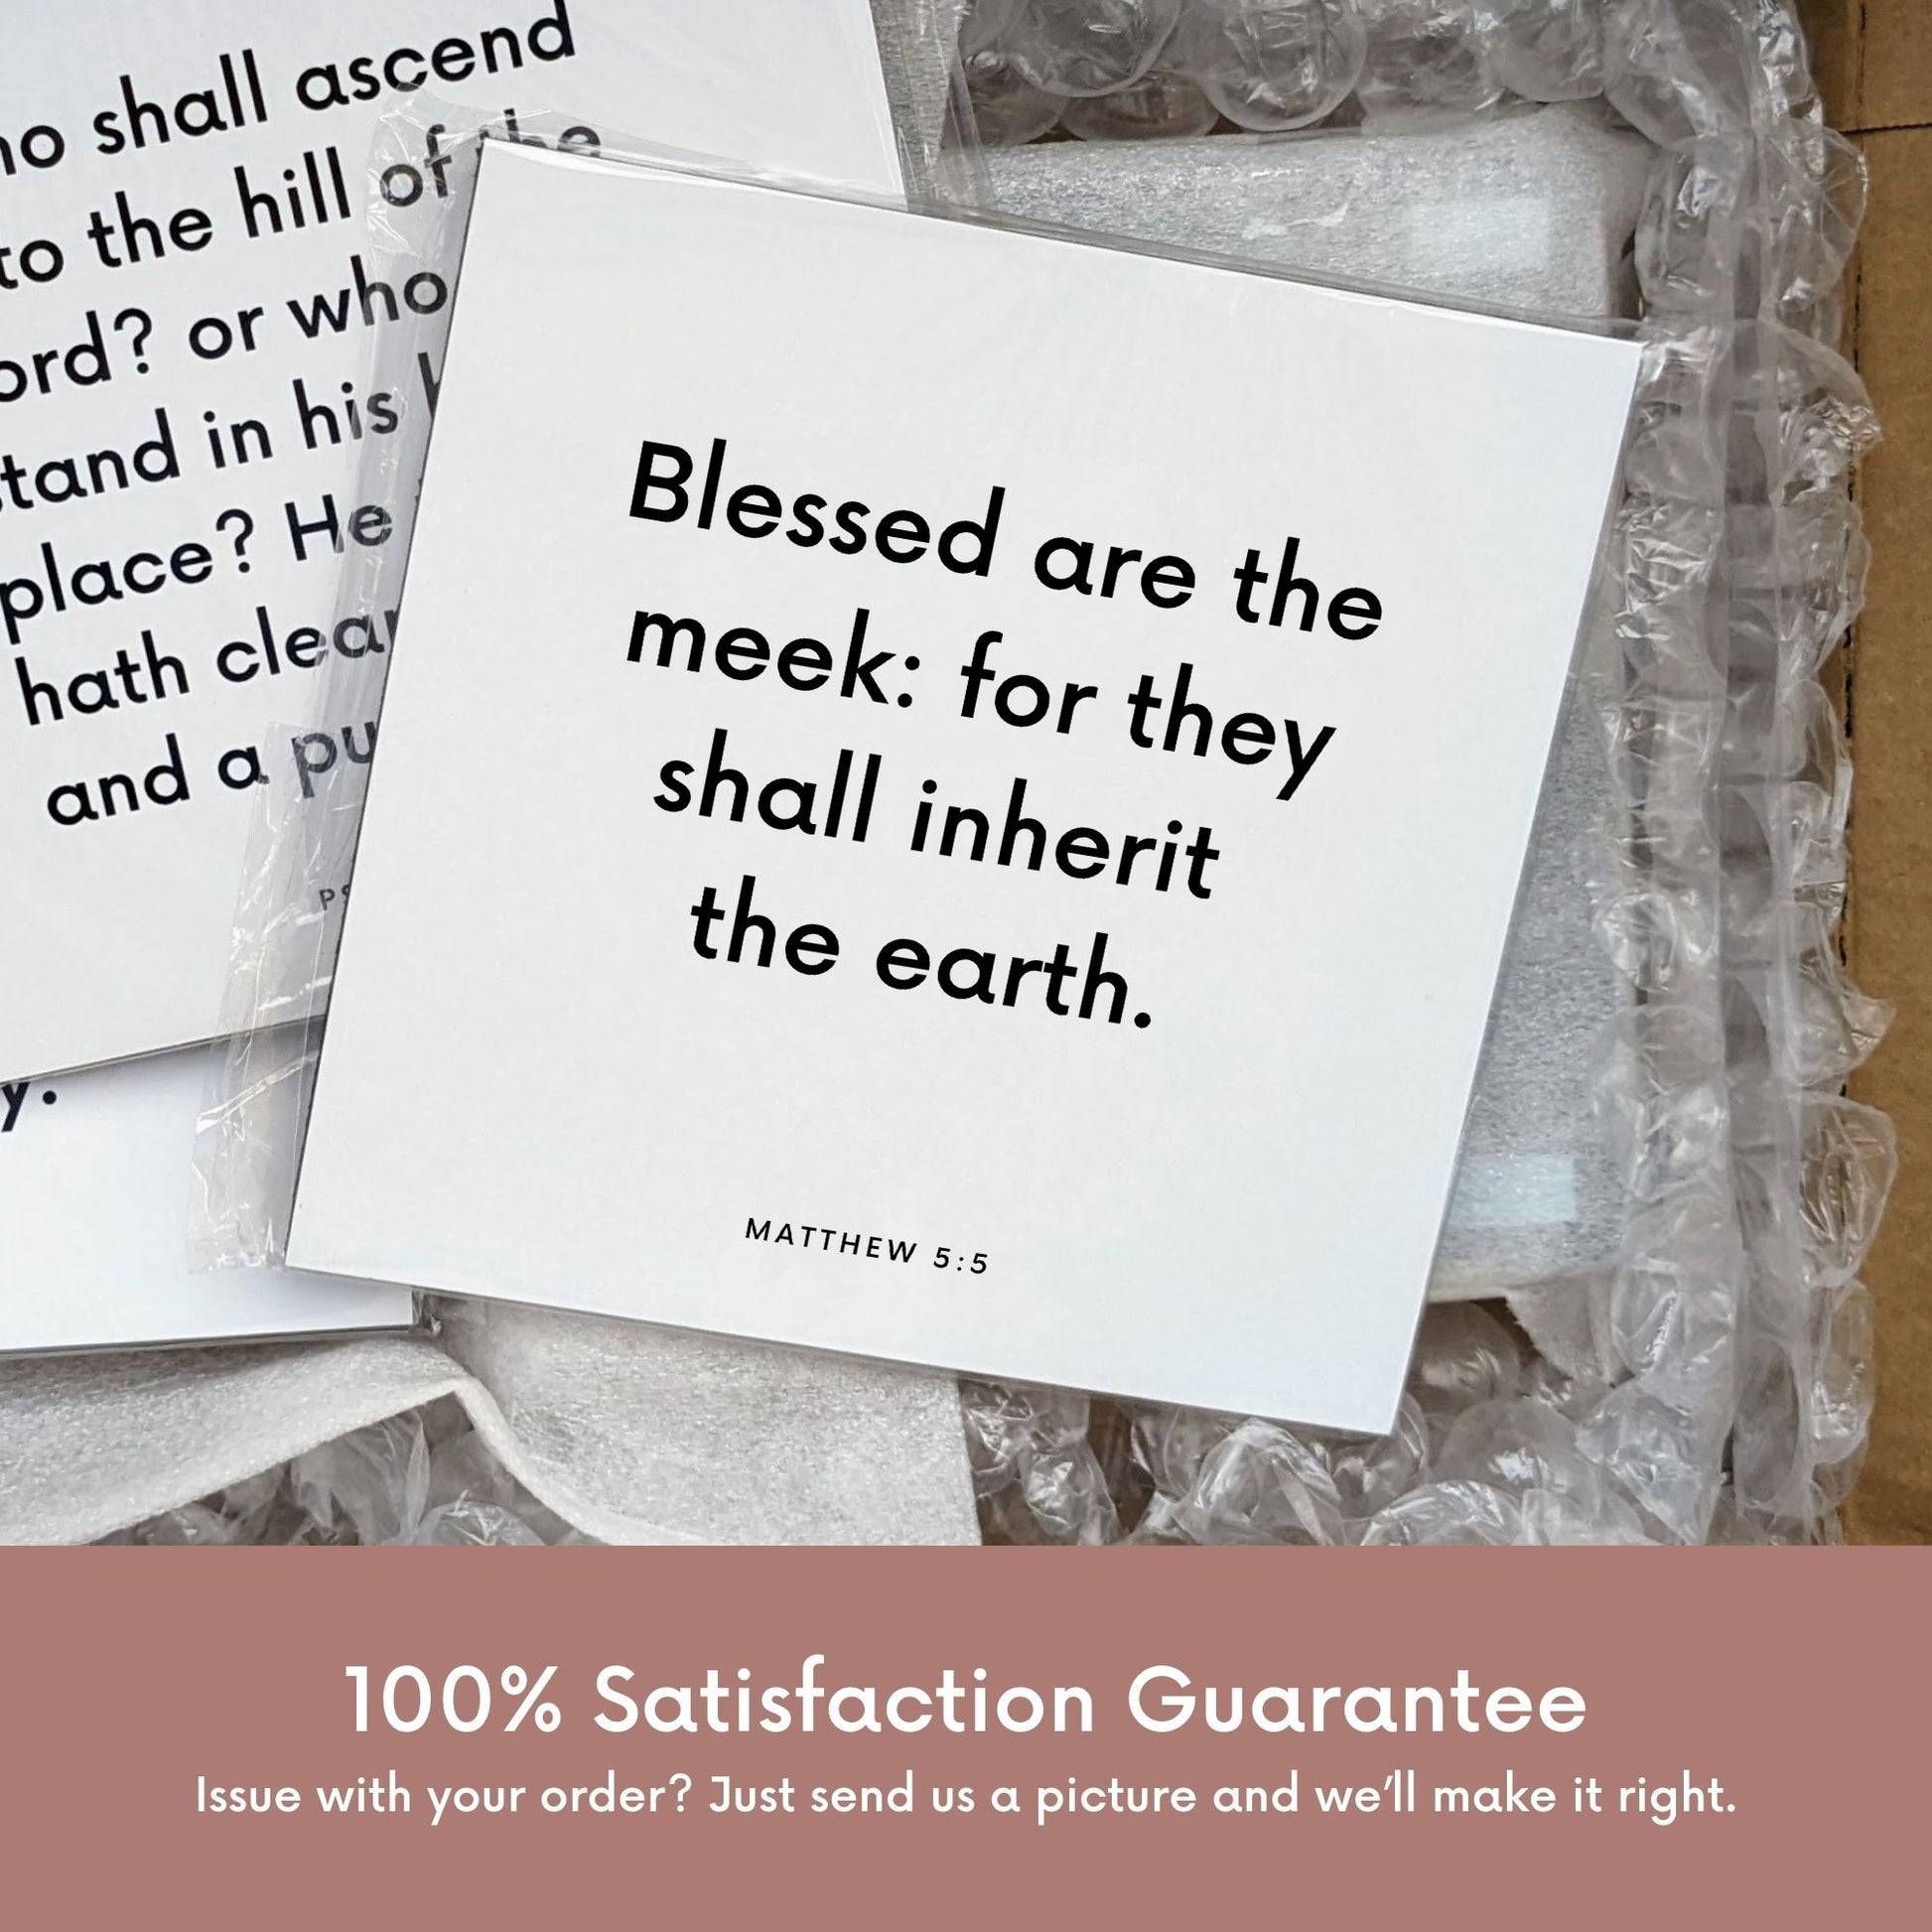 Shipping materials for scripture tile of Matthew 5:5 - "Blessed are the meek: for they shall inherit the earth"